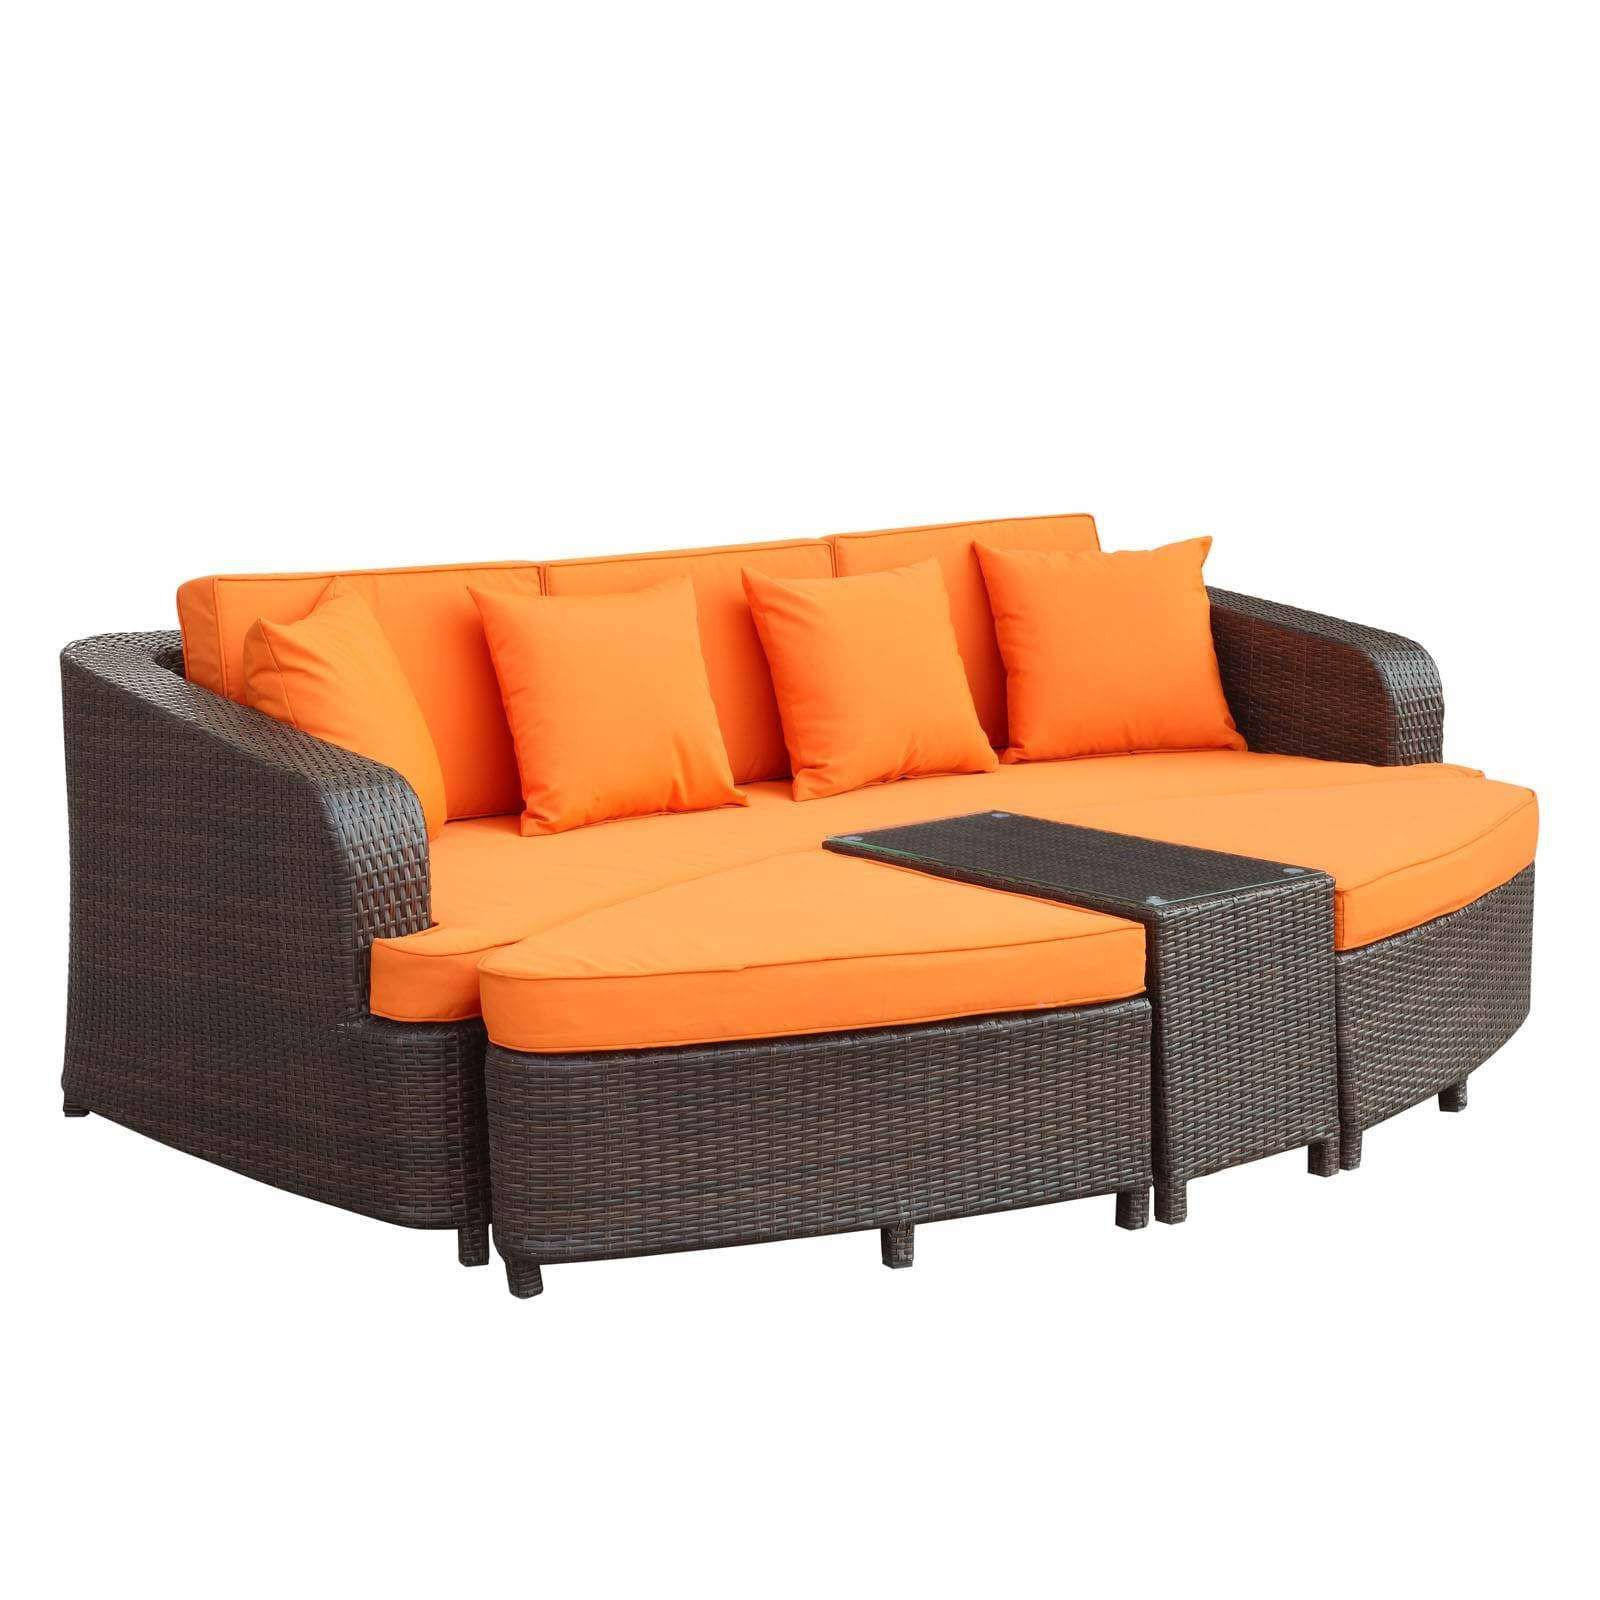 Modterior :: Outdoor :: Sectional Sets :: Monterey 4 Piece Outdoor Throughout 4 Piece Outdoor Sectional Patio Sets (View 8 of 15)